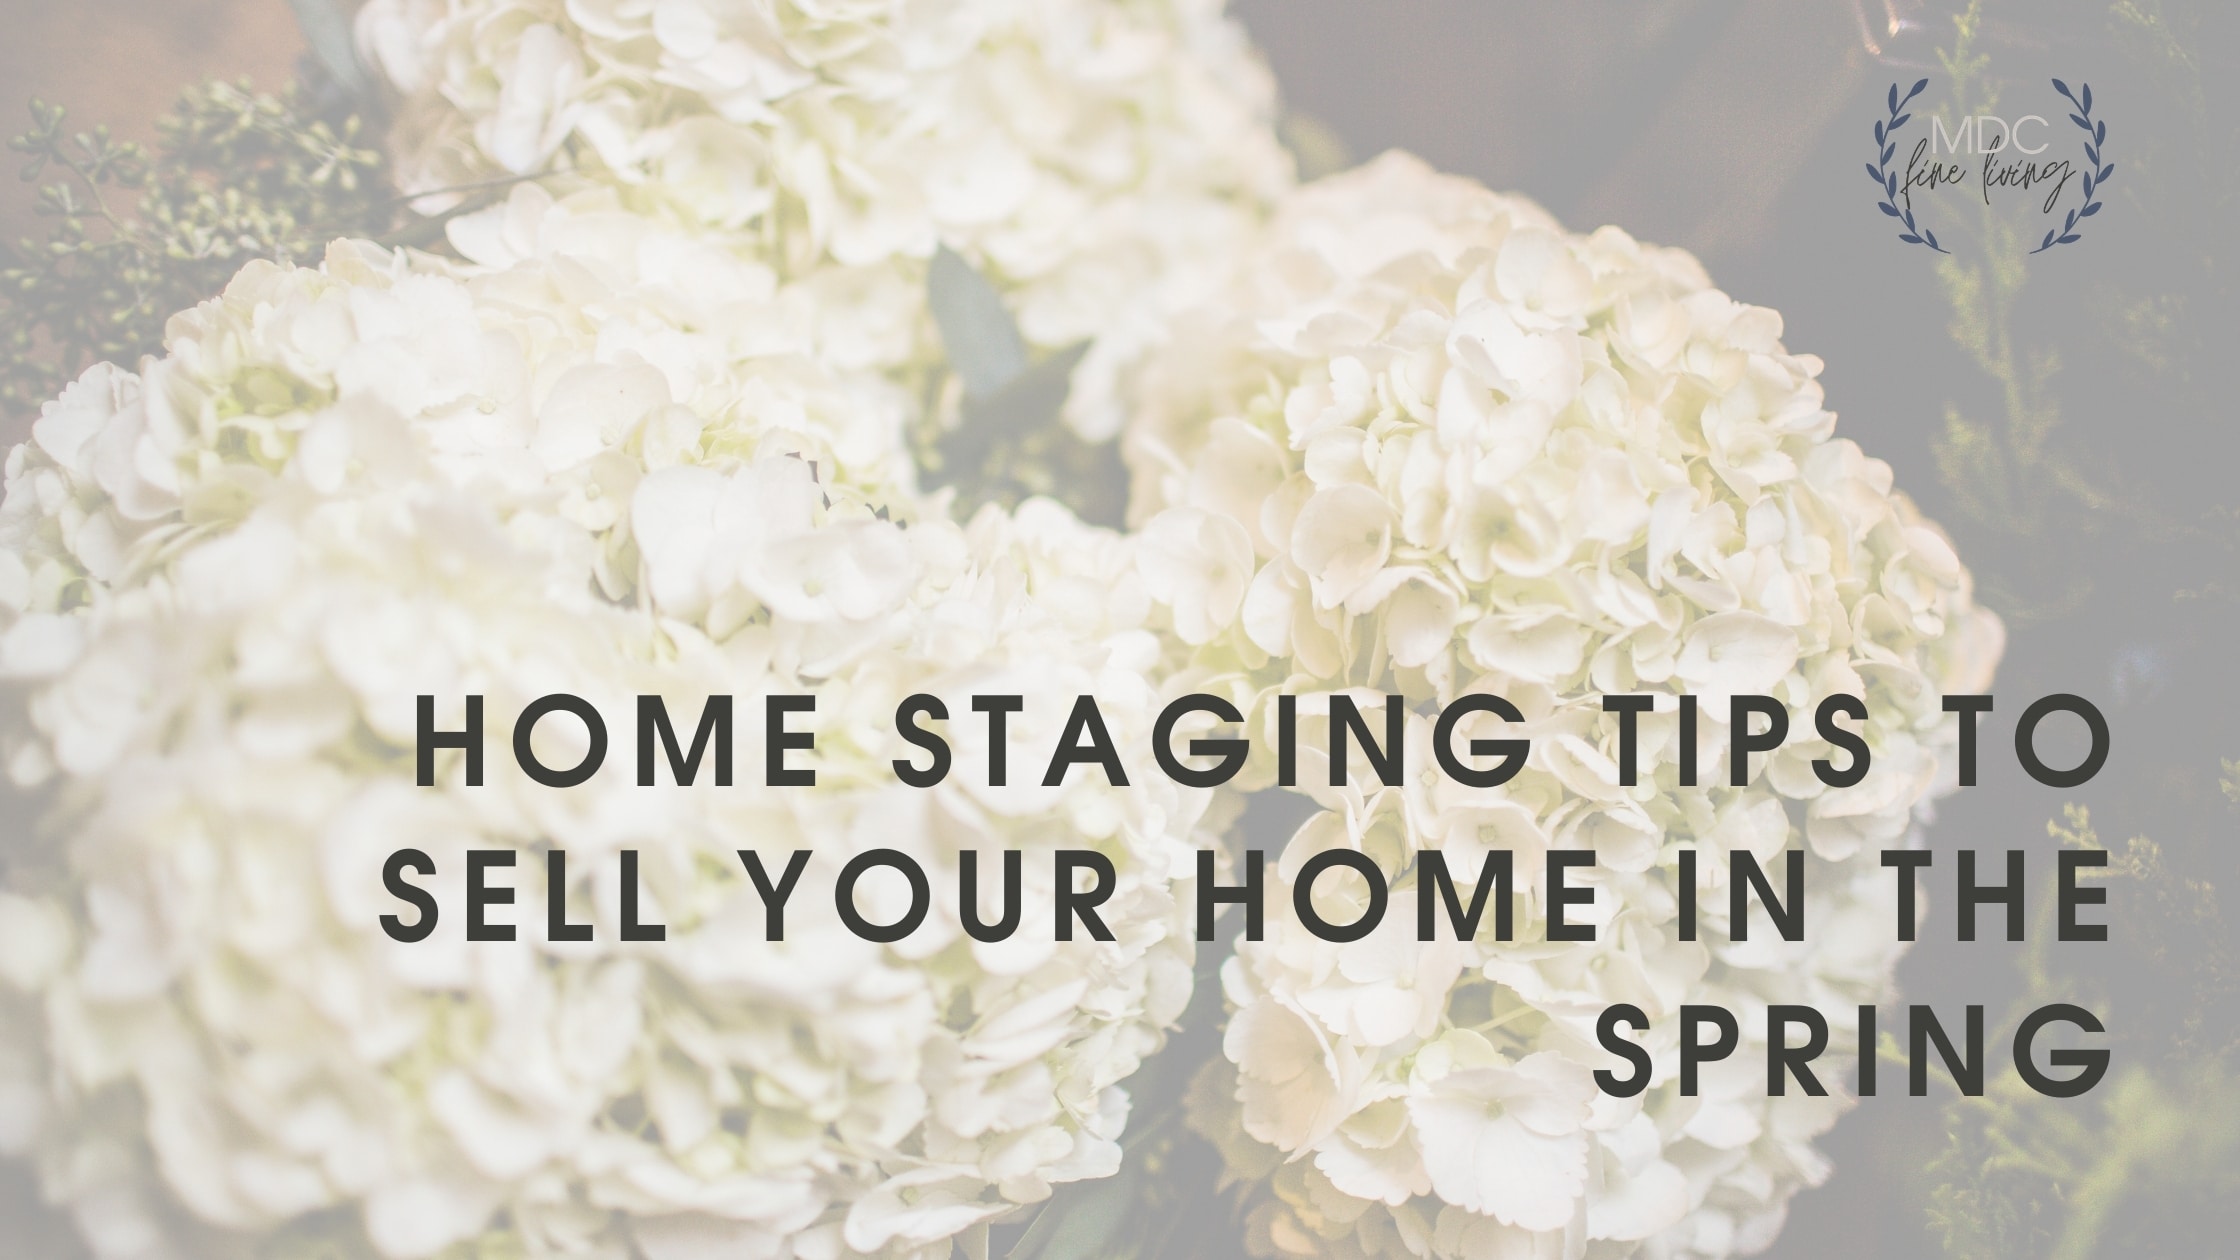 Title card for post that reads, "Home Staging Tips to sell your home this Spring."